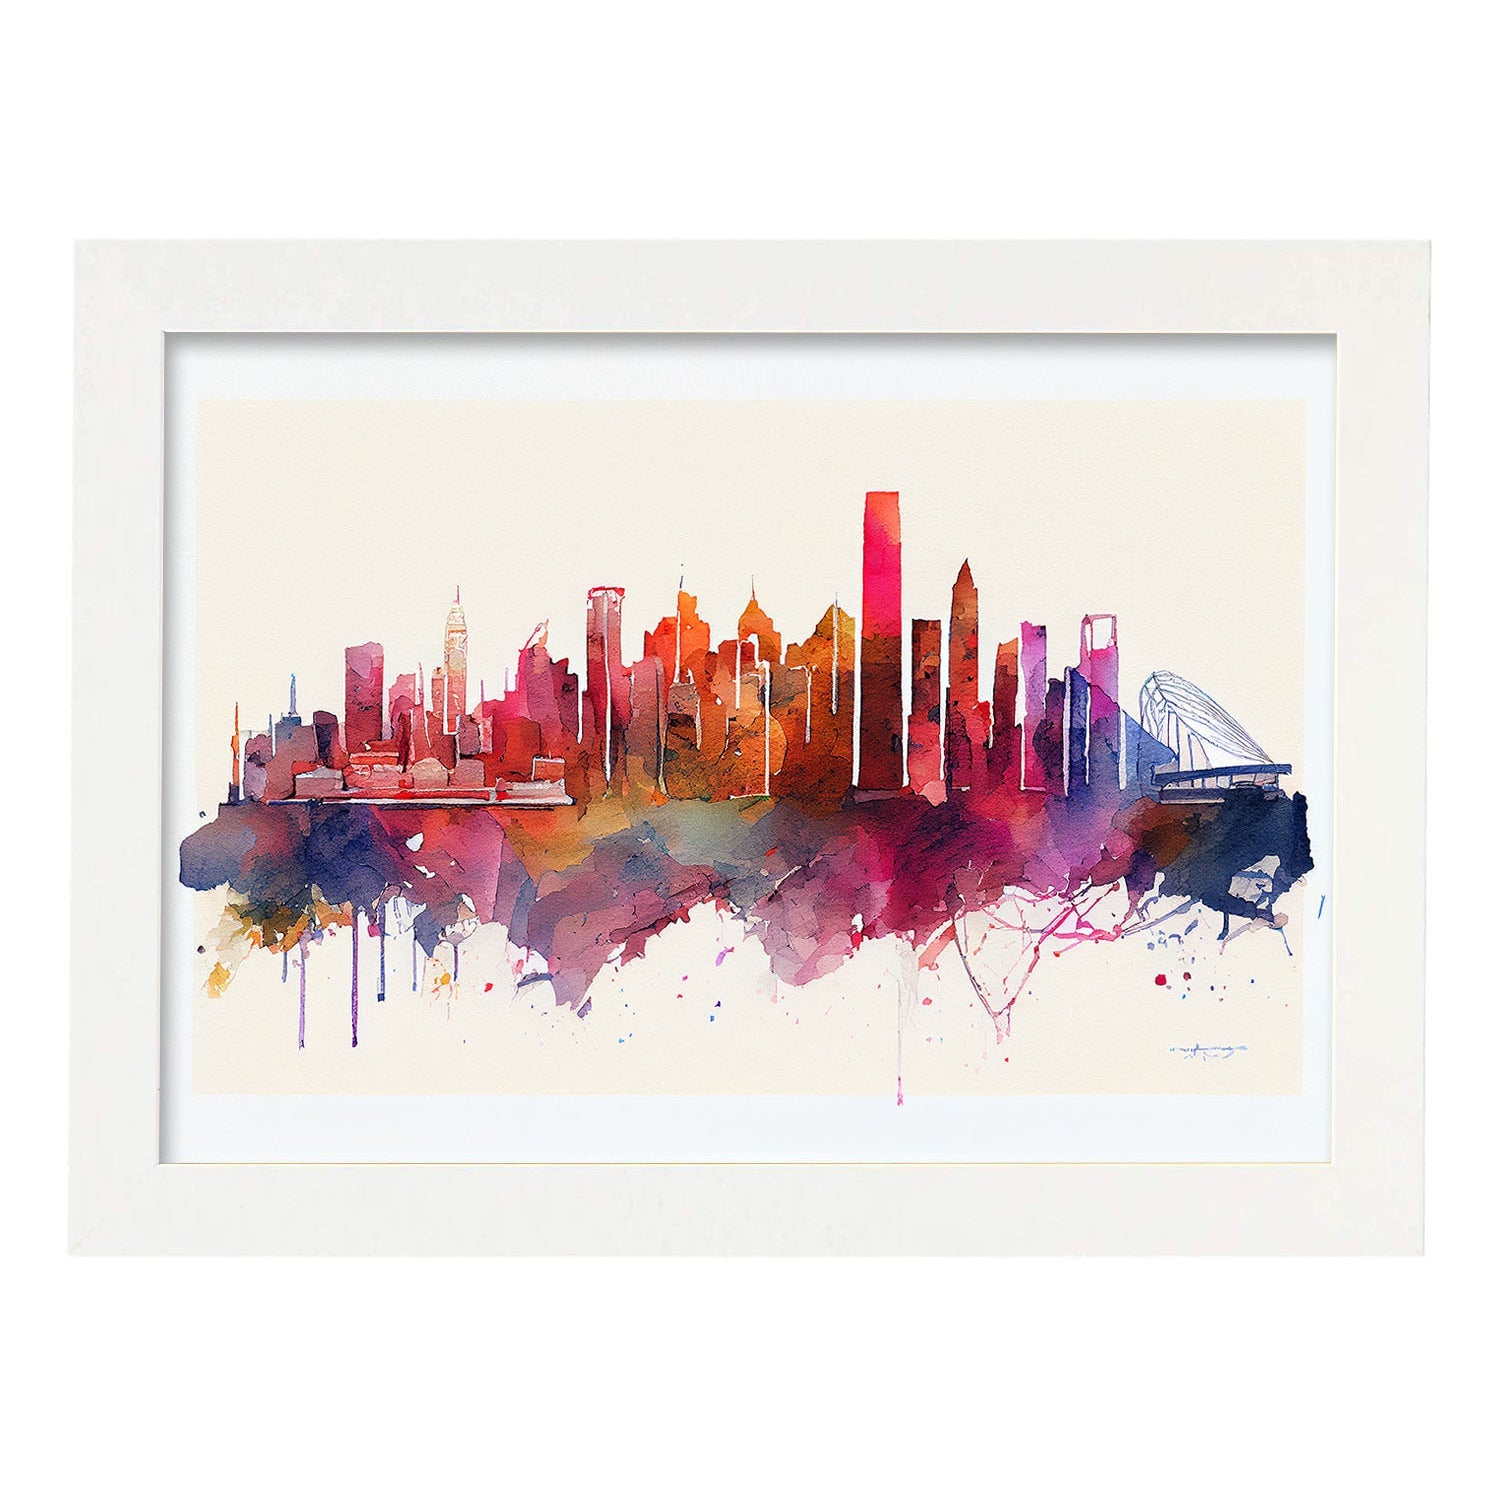 Nacnic watercolor of a skyline of the city of Hong Kong_4. Aesthetic Wall Art Prints for Bedroom or Living Room Design.-Artwork-Nacnic-A4-Marco Blanco-Nacnic Estudio SL